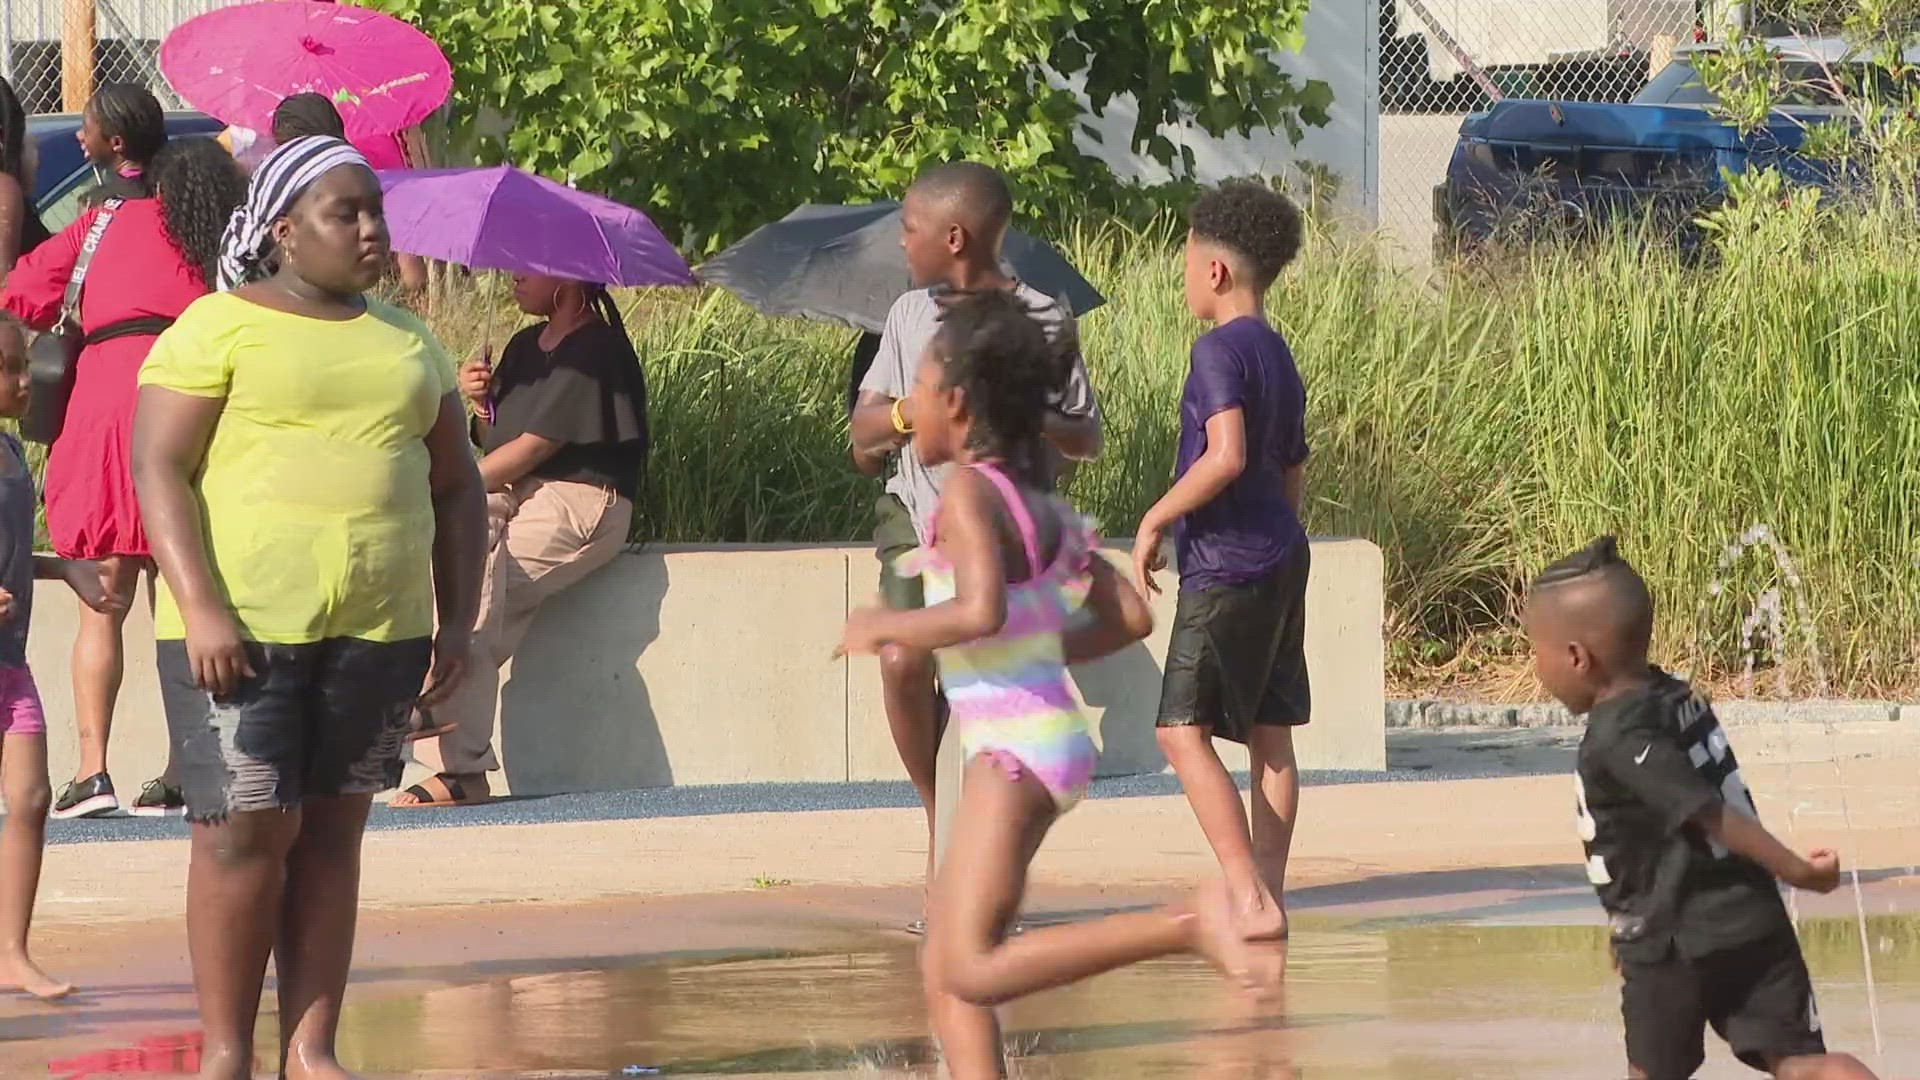 Organizers said the triple-digit temps didn’t keep people away from their 9th consecutive year hosting the event.